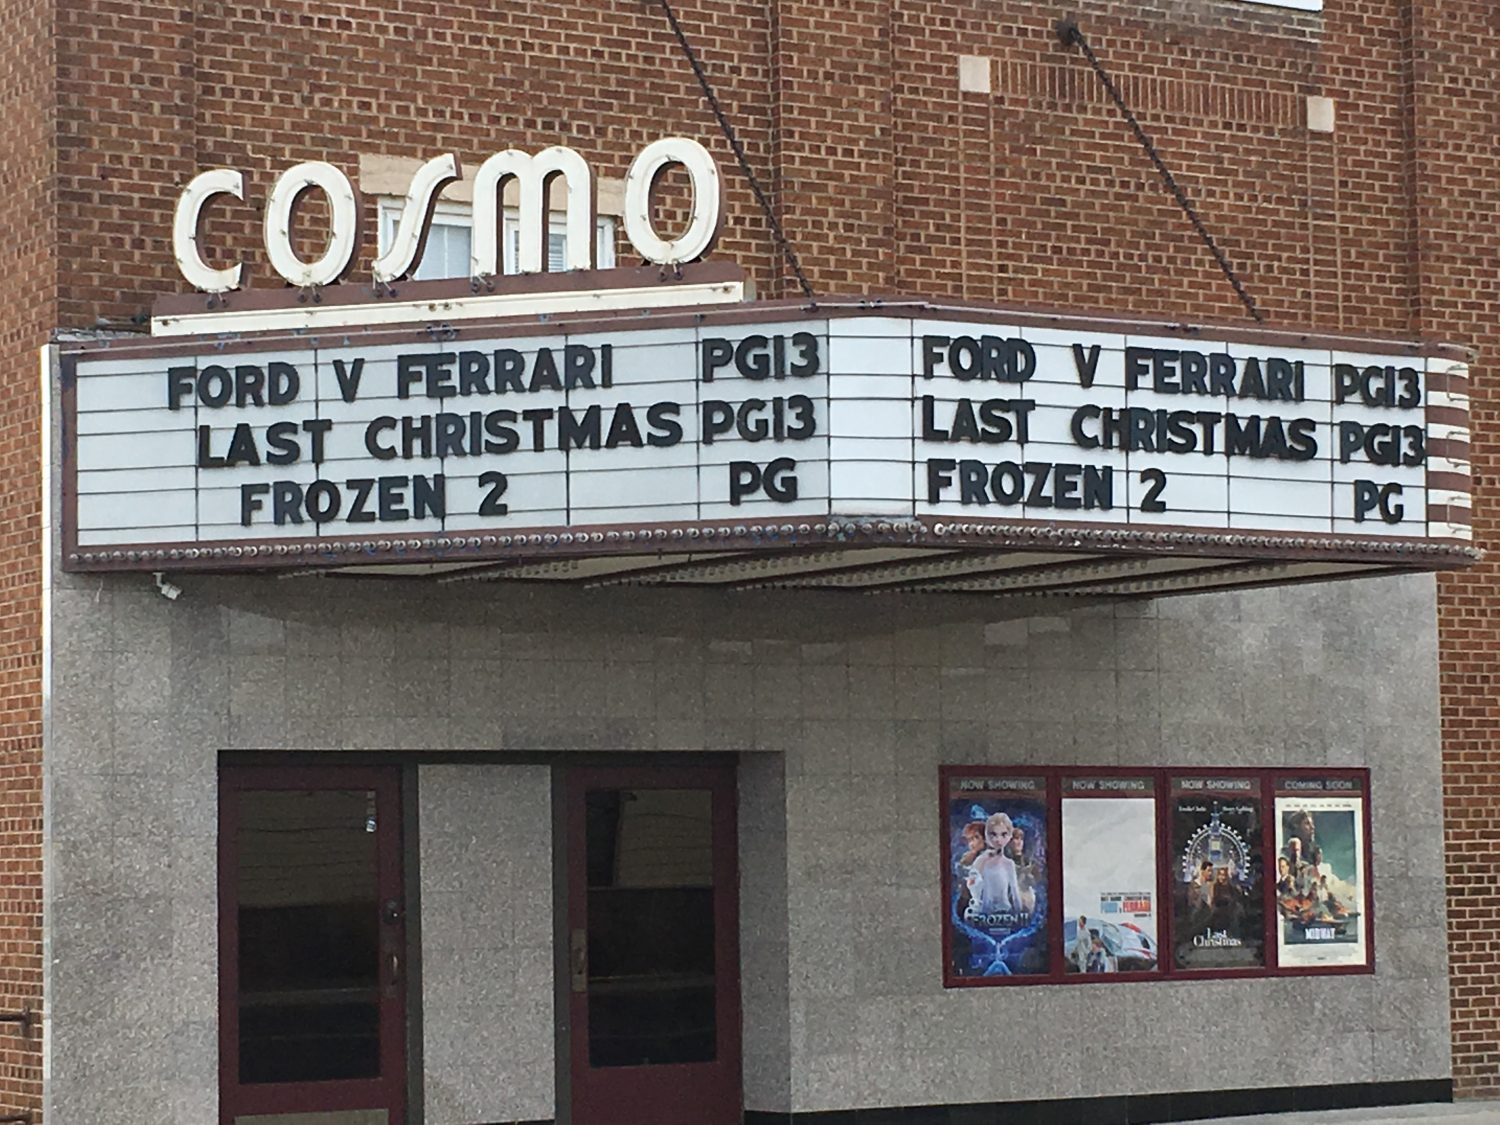 Take your Veteran to the Cosmo for Free Frozen II movie event